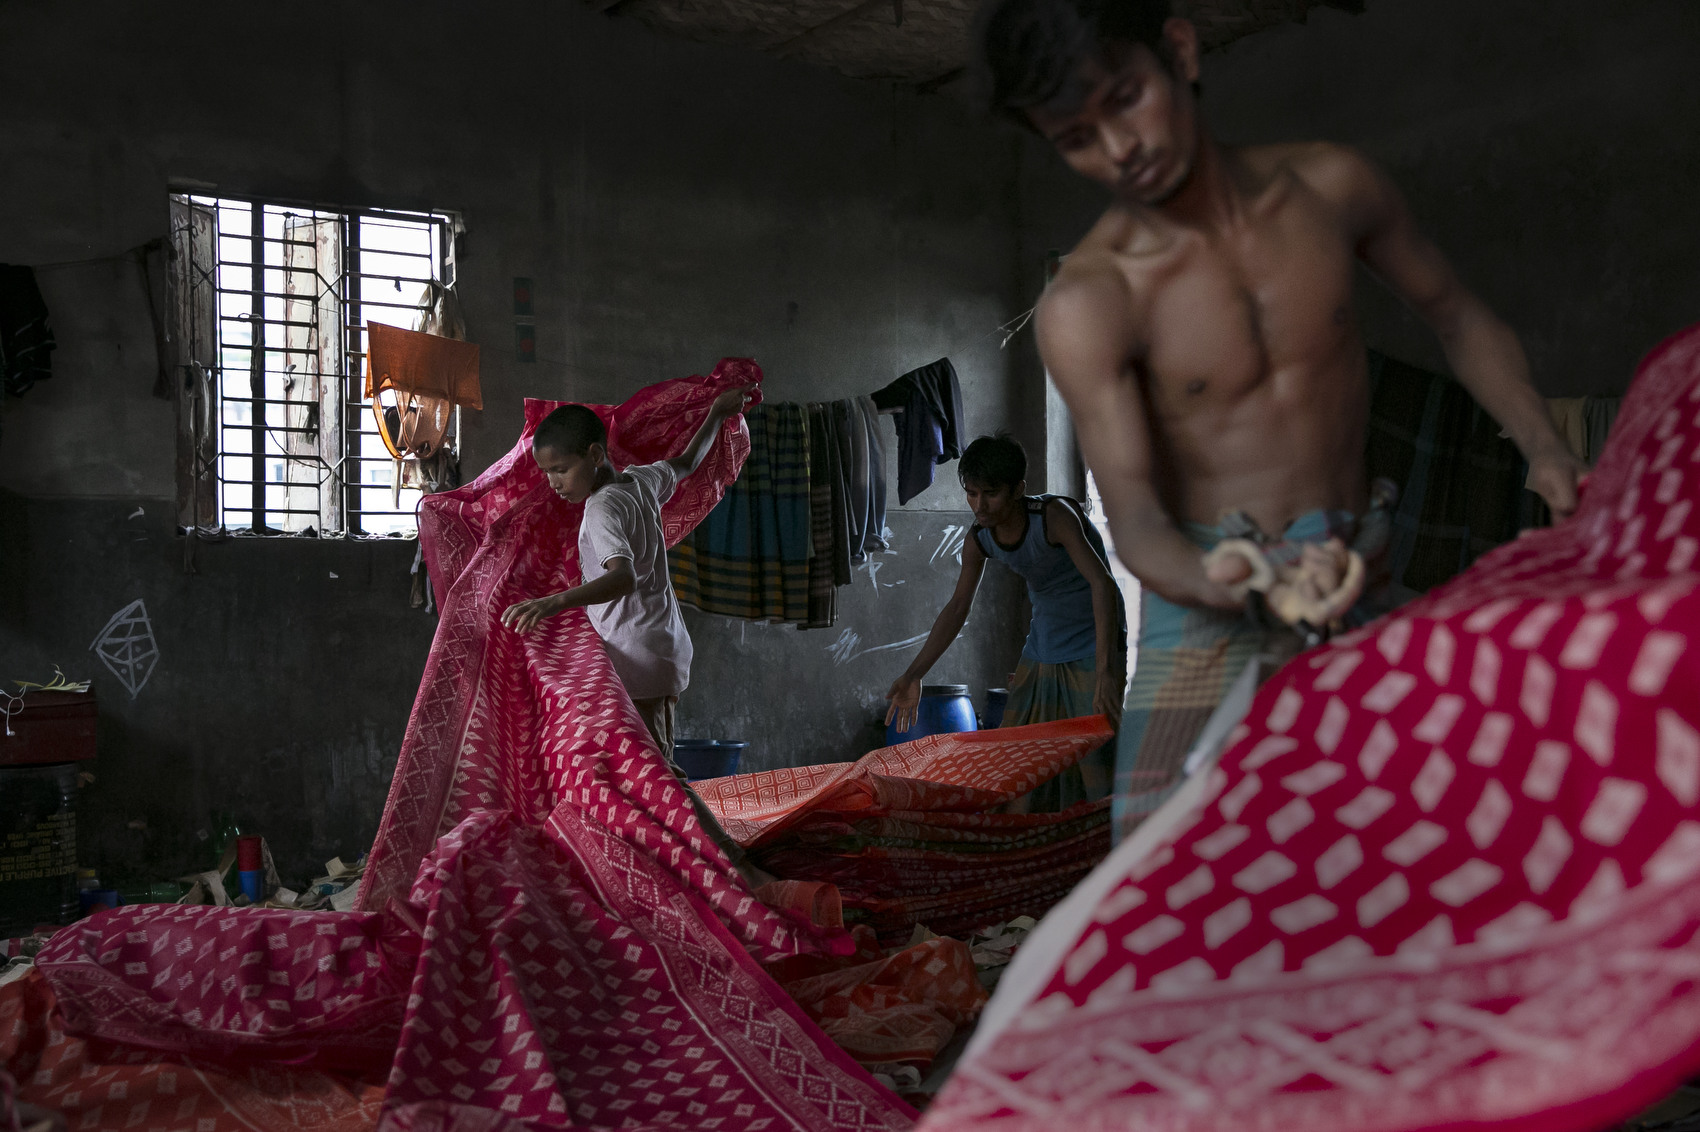 People work in a dying factory in Shyampur, whose waste is dumped into the Buriganga river in Dhaka, Bangladesh. Bangladesh has been reportedly ranked 10th out of the top 20 plastic polluter in the world with the Buriganga river known as one of the most polluted rivers in the country due to rampant dumping of industrial and human waste. Like many developing countries, Bangladesh lacks the infrastructure to effectively manage their waste which causes problems in keeping the waters safe for human and aquatic lives while dozens of tanneries on the banks of the river contribute industrial waste into the ground water. As June 5 was marked by the United Nations as World Environment Day, Buriganga symbolizes the general state of many rivers in Bangladesh, with the growing levels of pollutants and plastic waste consuming up all oxygen in the river and affecting our seafood while fishes consume bits of plastic which mimics their natural food sources and eventually lands on our dinner table. (Photo by Allison Joyce/Getty Images)